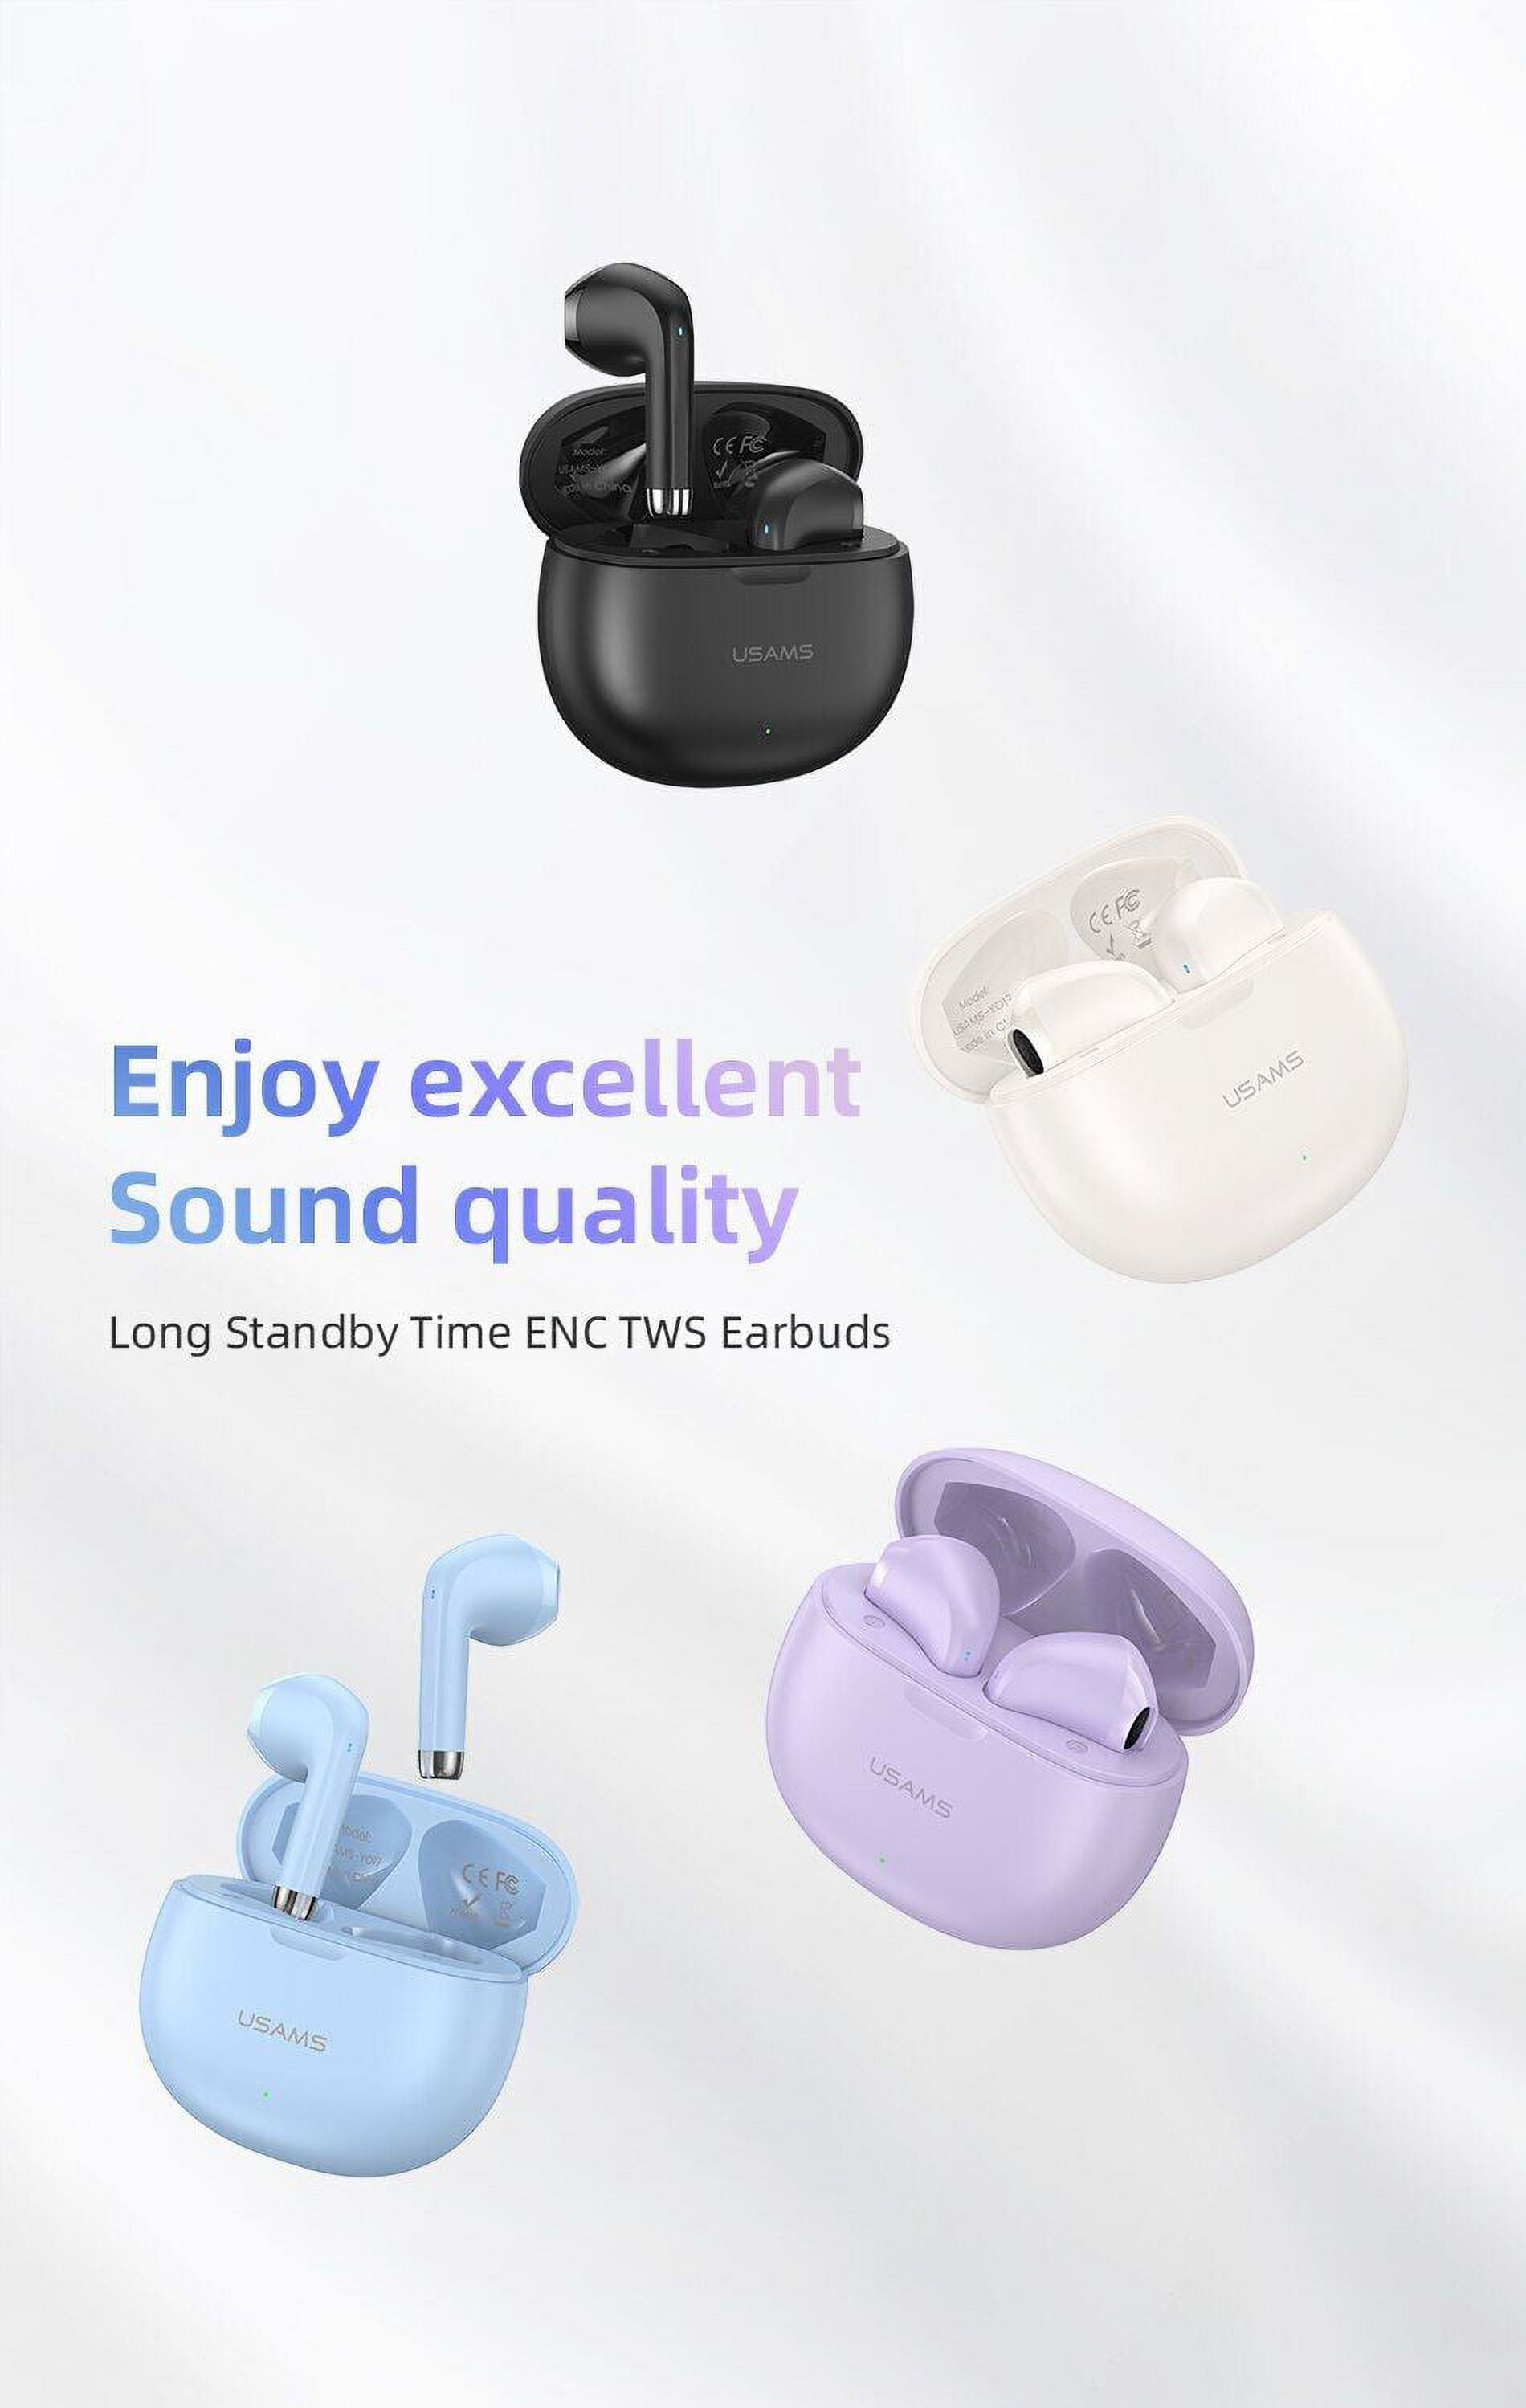 for Samsung Galaxy A34 Wireless Earbuds Bluetooth 5.3 Headphones with  Charging Case,Wireless Earphones with Noise Cancelling Mic,IPX4 Waterproof  Earphones,Touch Control - White 